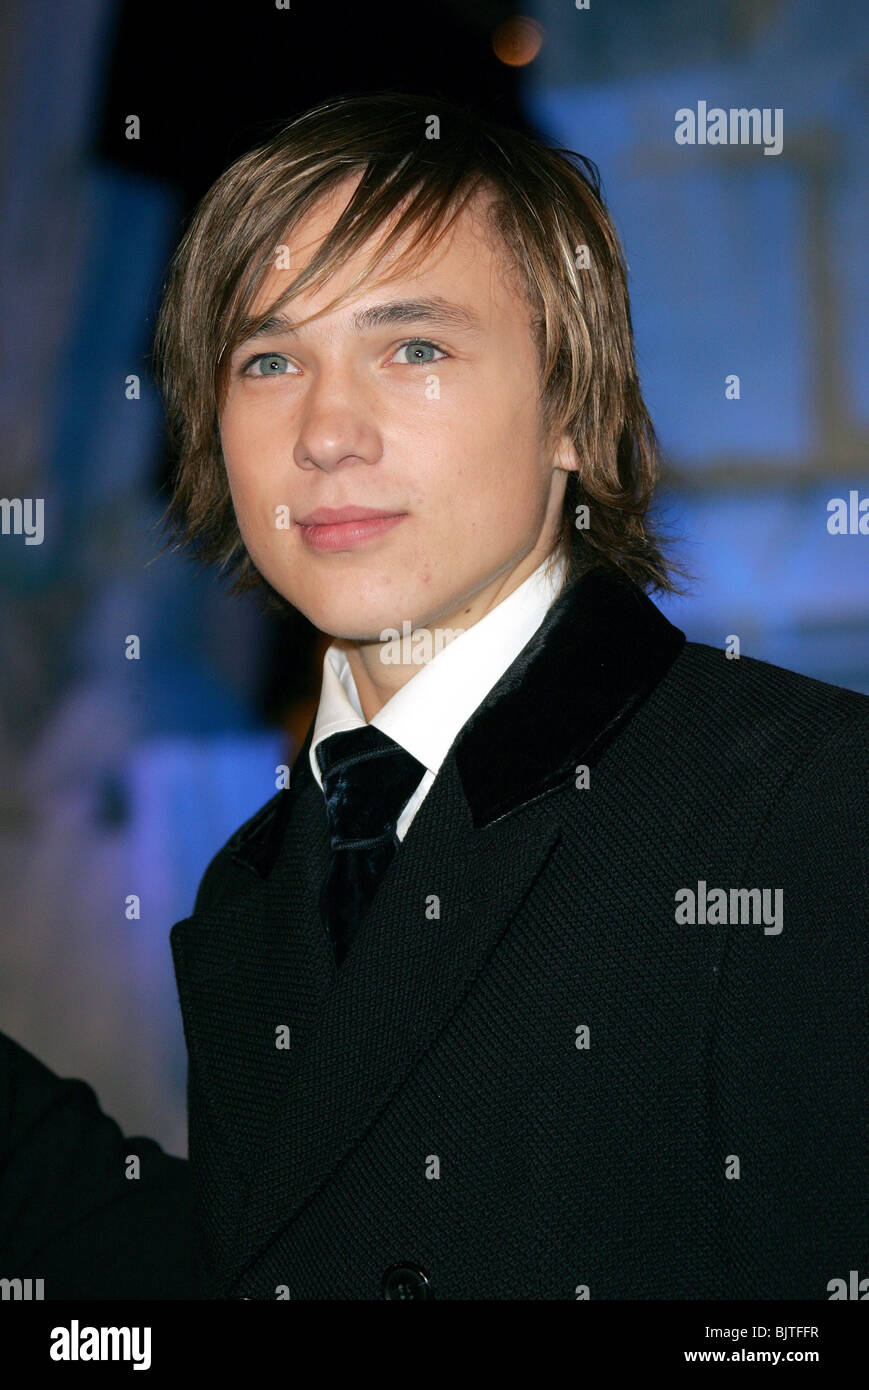 WILLIAM MOSELEY THE CHRONICLES OF NARNIA FILM PREMIER THE ROYAL ALBERT HALL LONDON ENGLAND 07 December 2005 Stock Photo